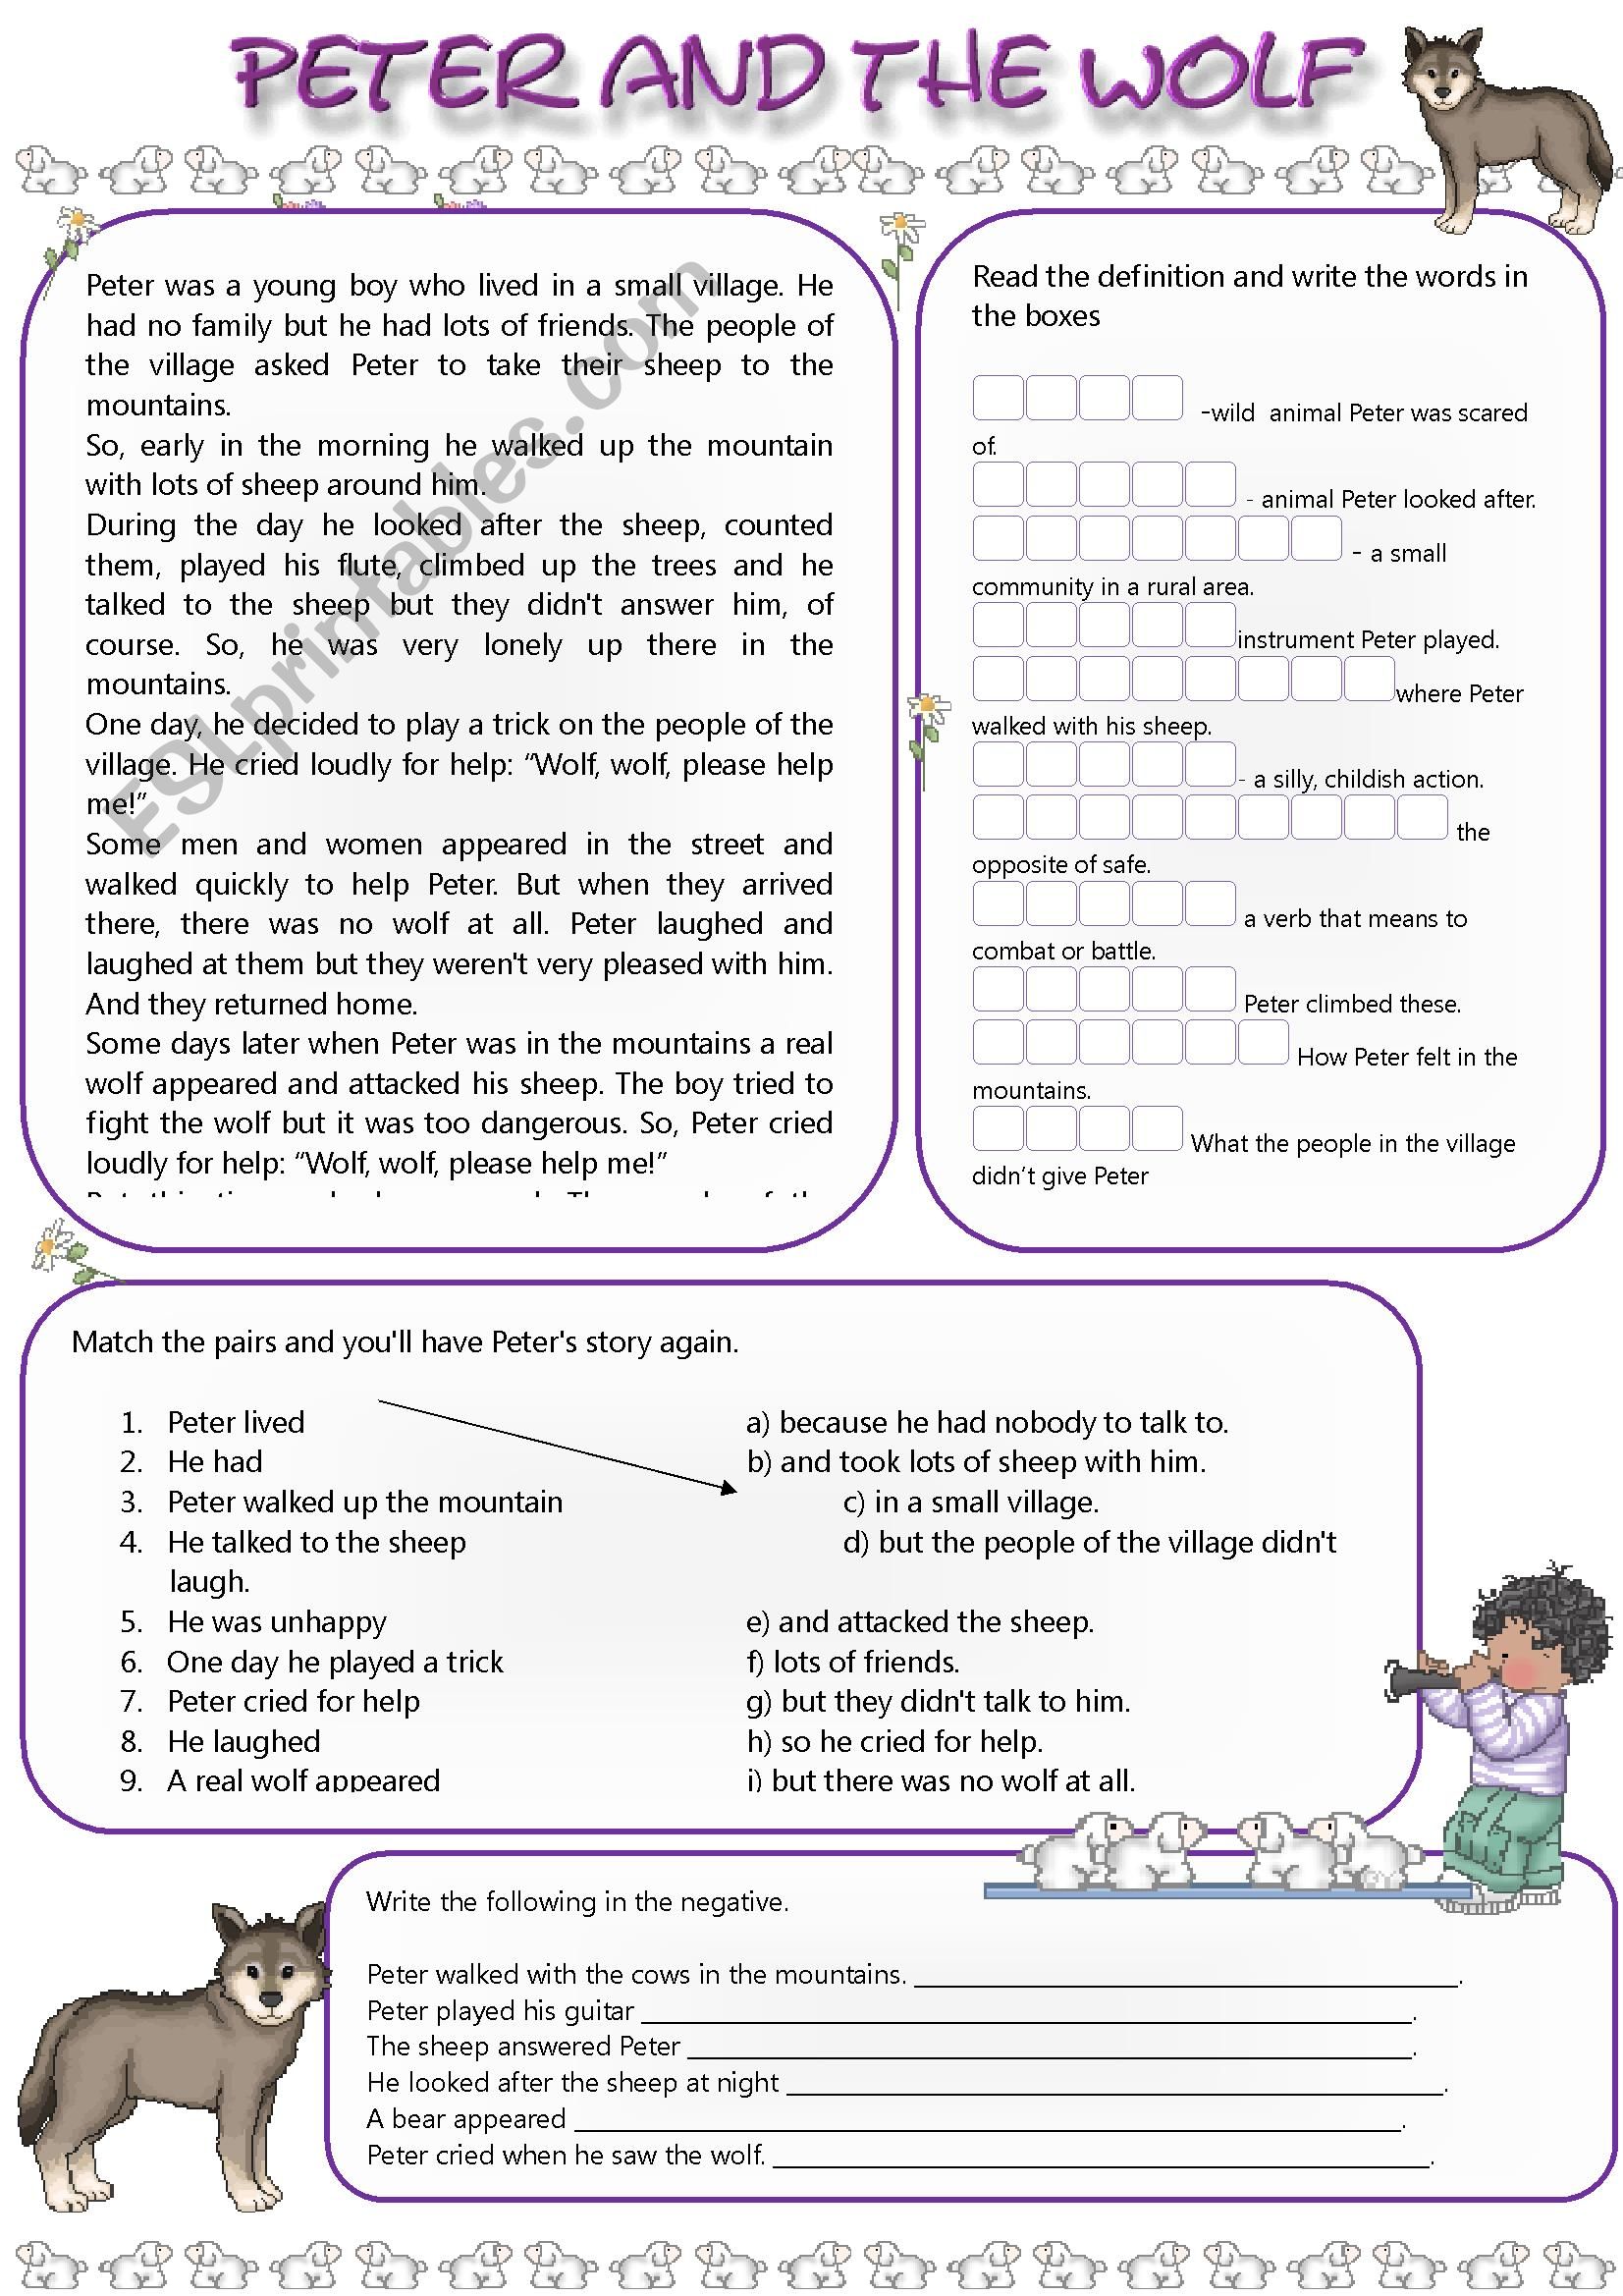 Peter and The Wolf - ESL worksheet by mandysantos For Peter And The Wolf Worksheet